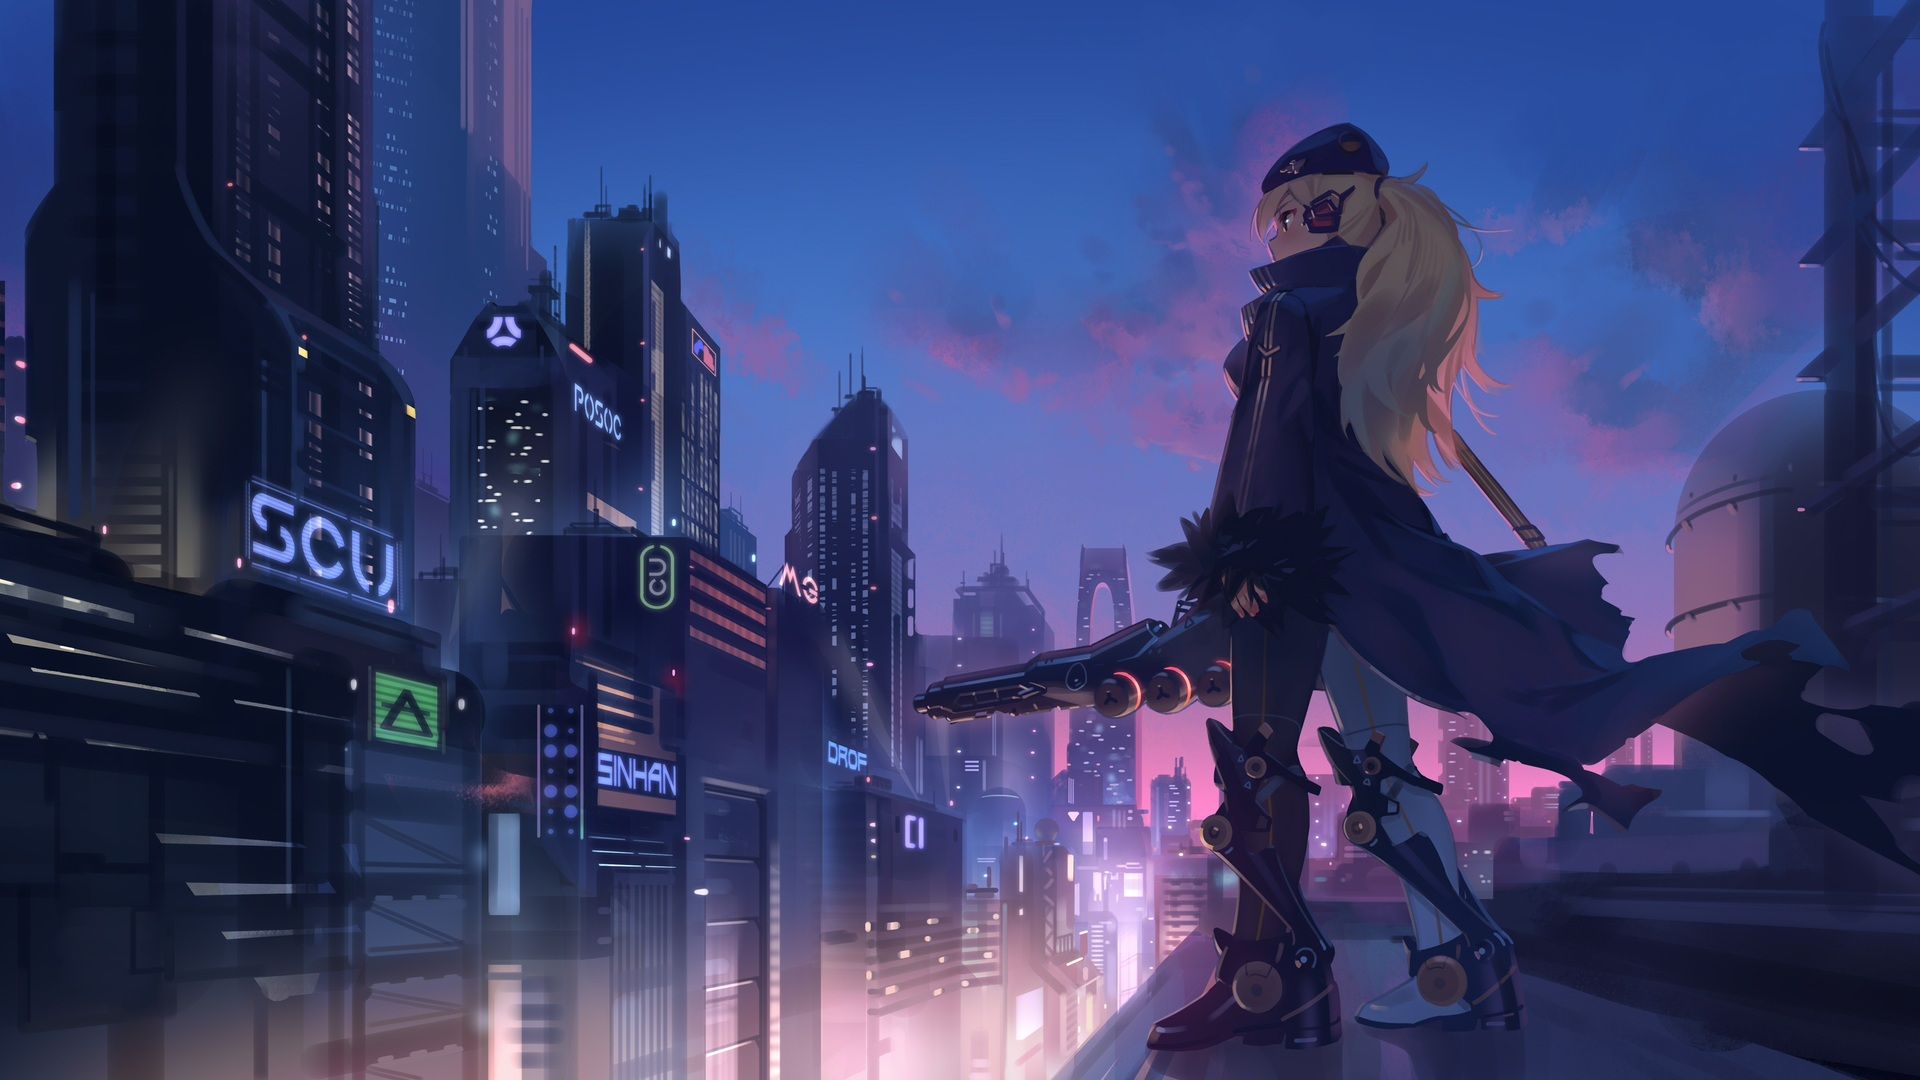 Anime Girl In City 4k Laptop Full HD 1080P HD 4k Wallpaper, Image, Background, Photo and Picture